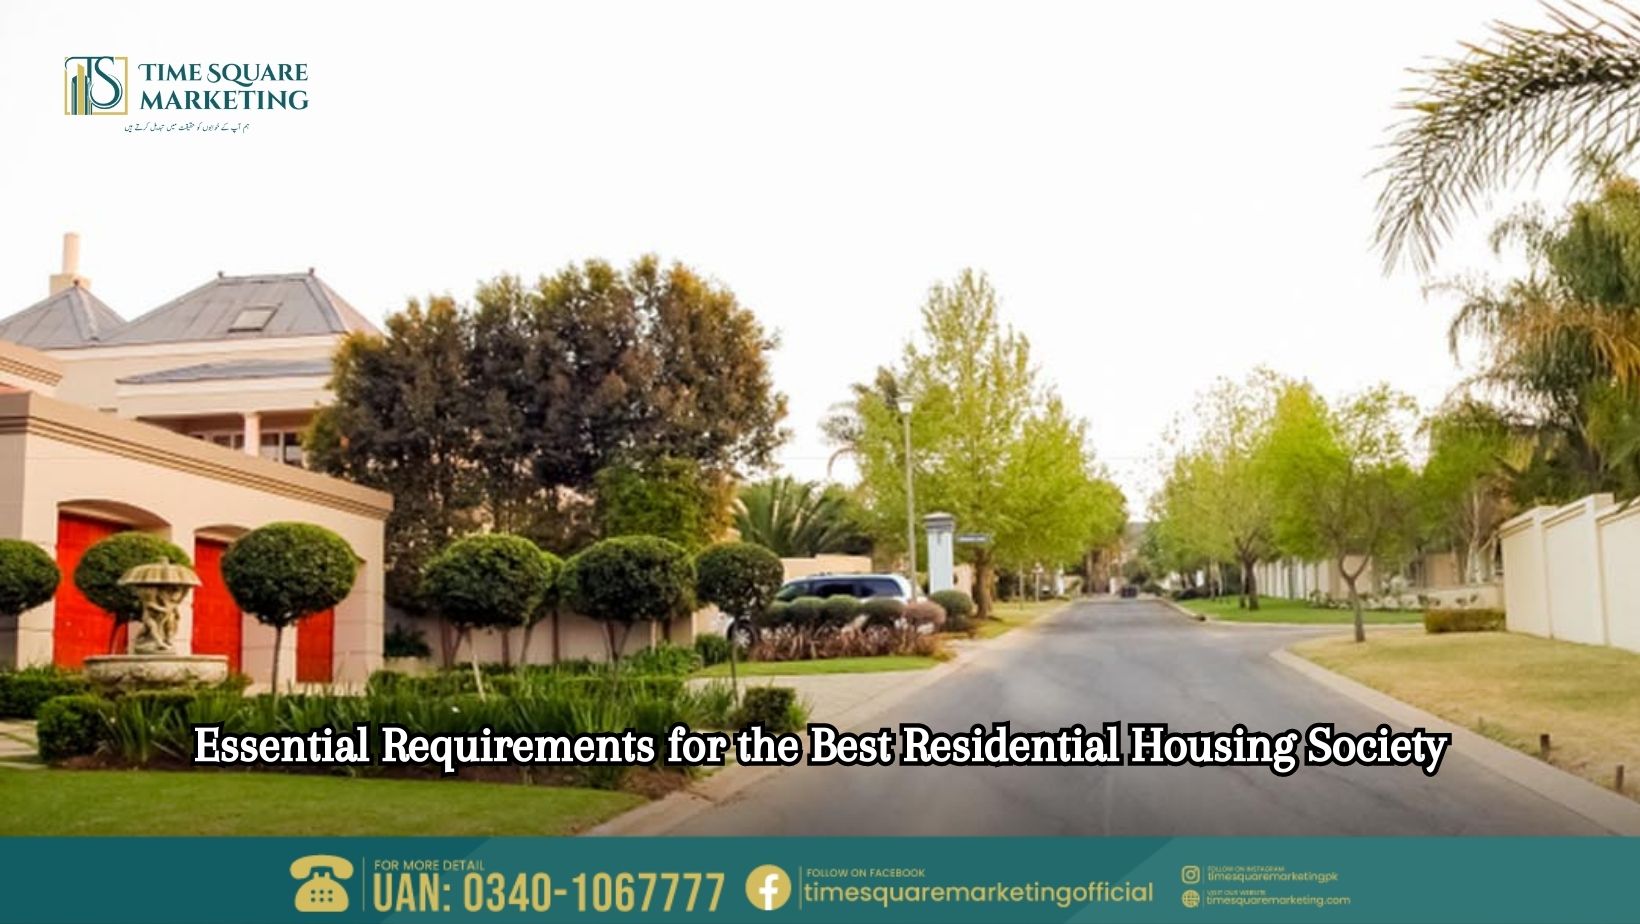 Essential Requirements for the Best Residential Housing Society